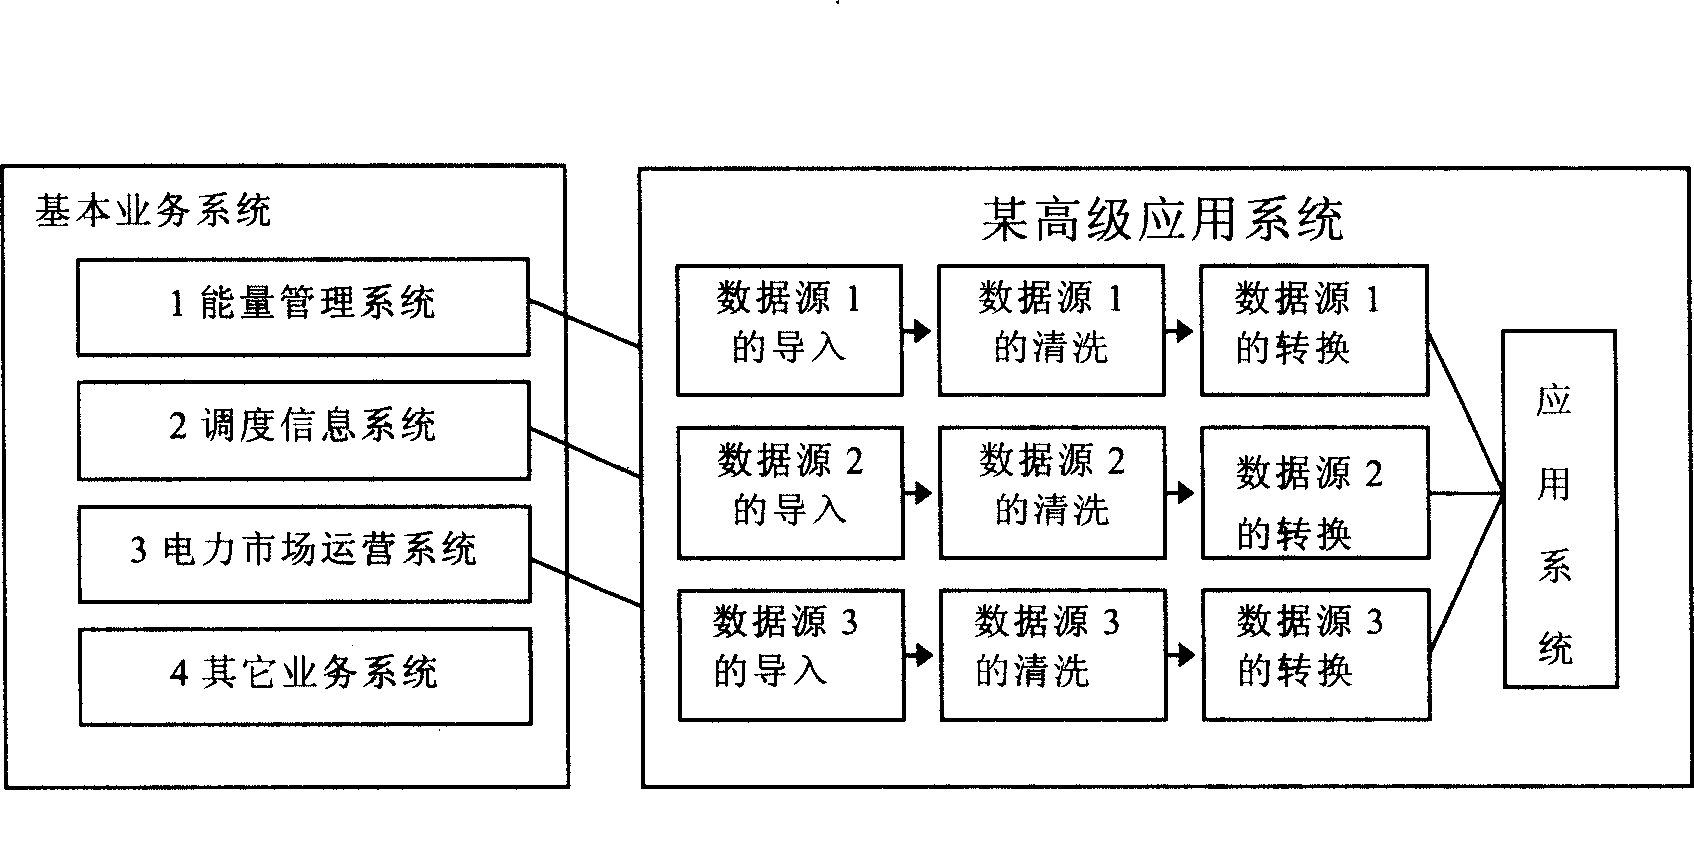 Multiple source data conversion service method and apparatus thereof